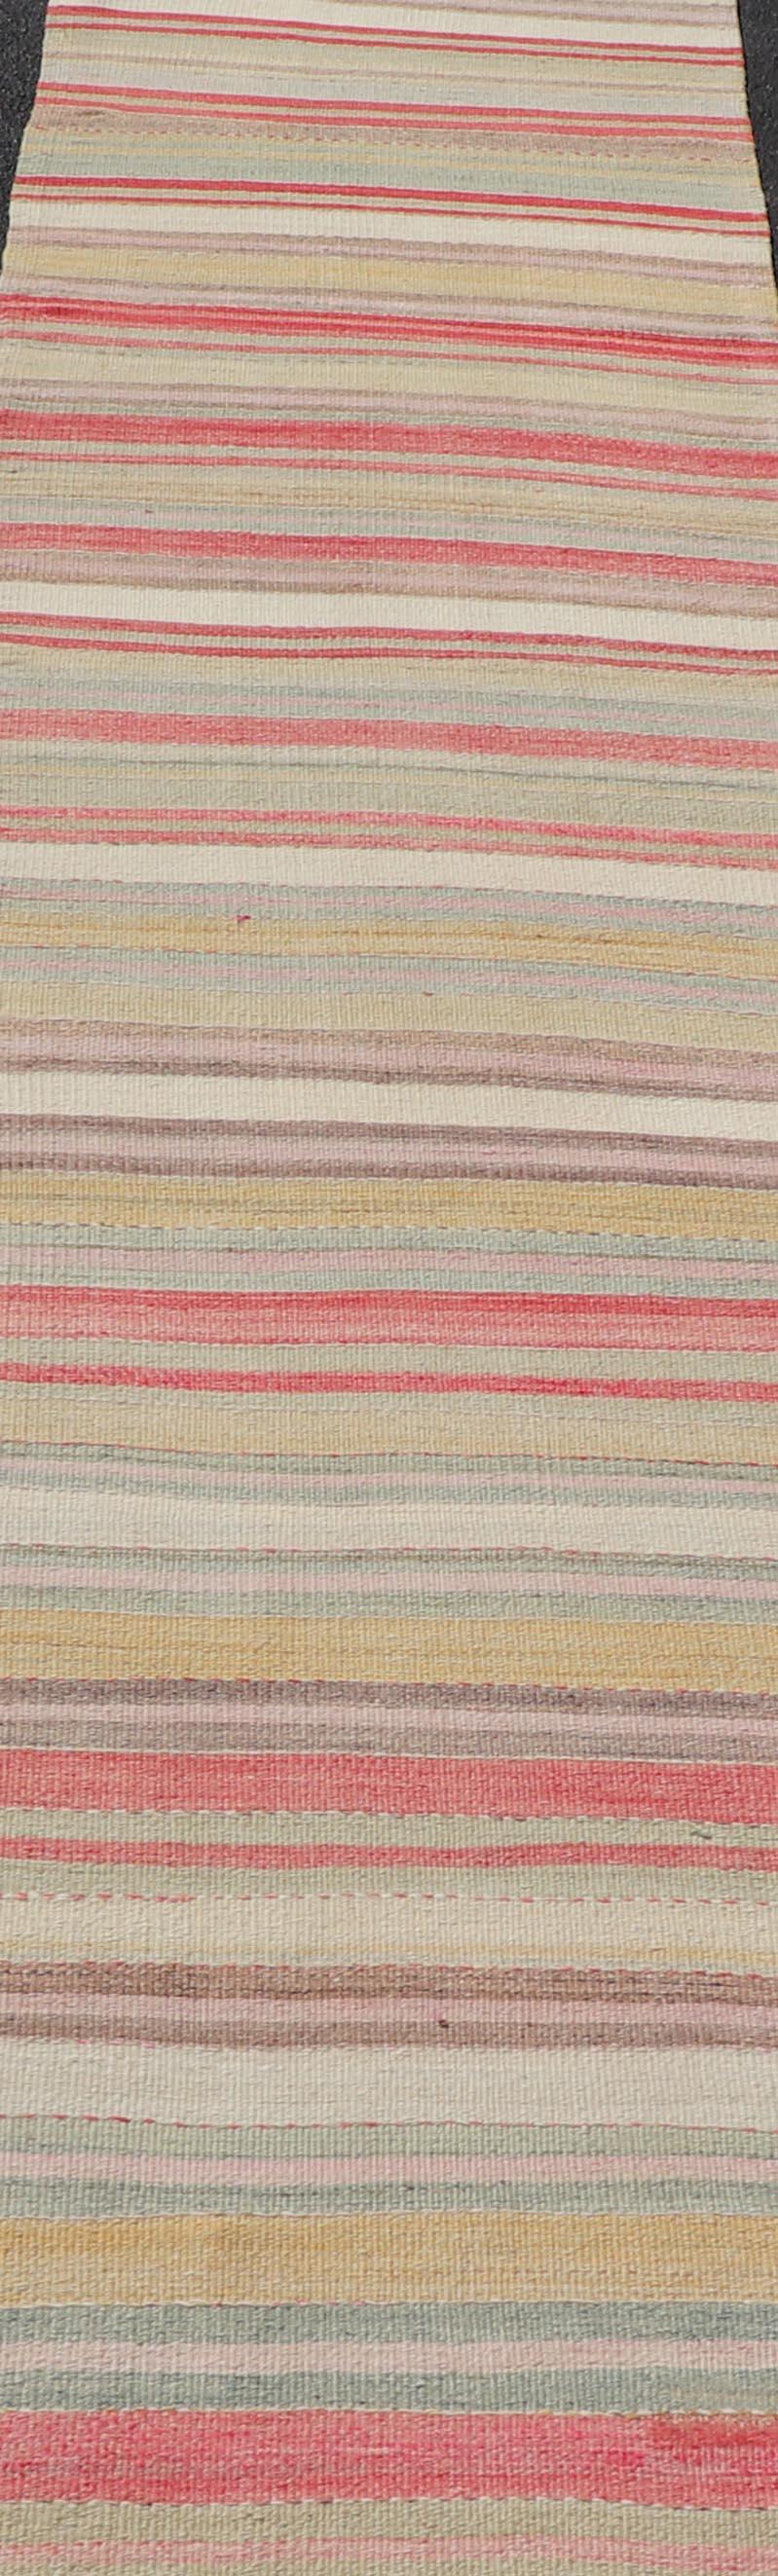 Colorful Vintage Turkish Kilim Runner with Stripes and Multi Colors  For Sale 1